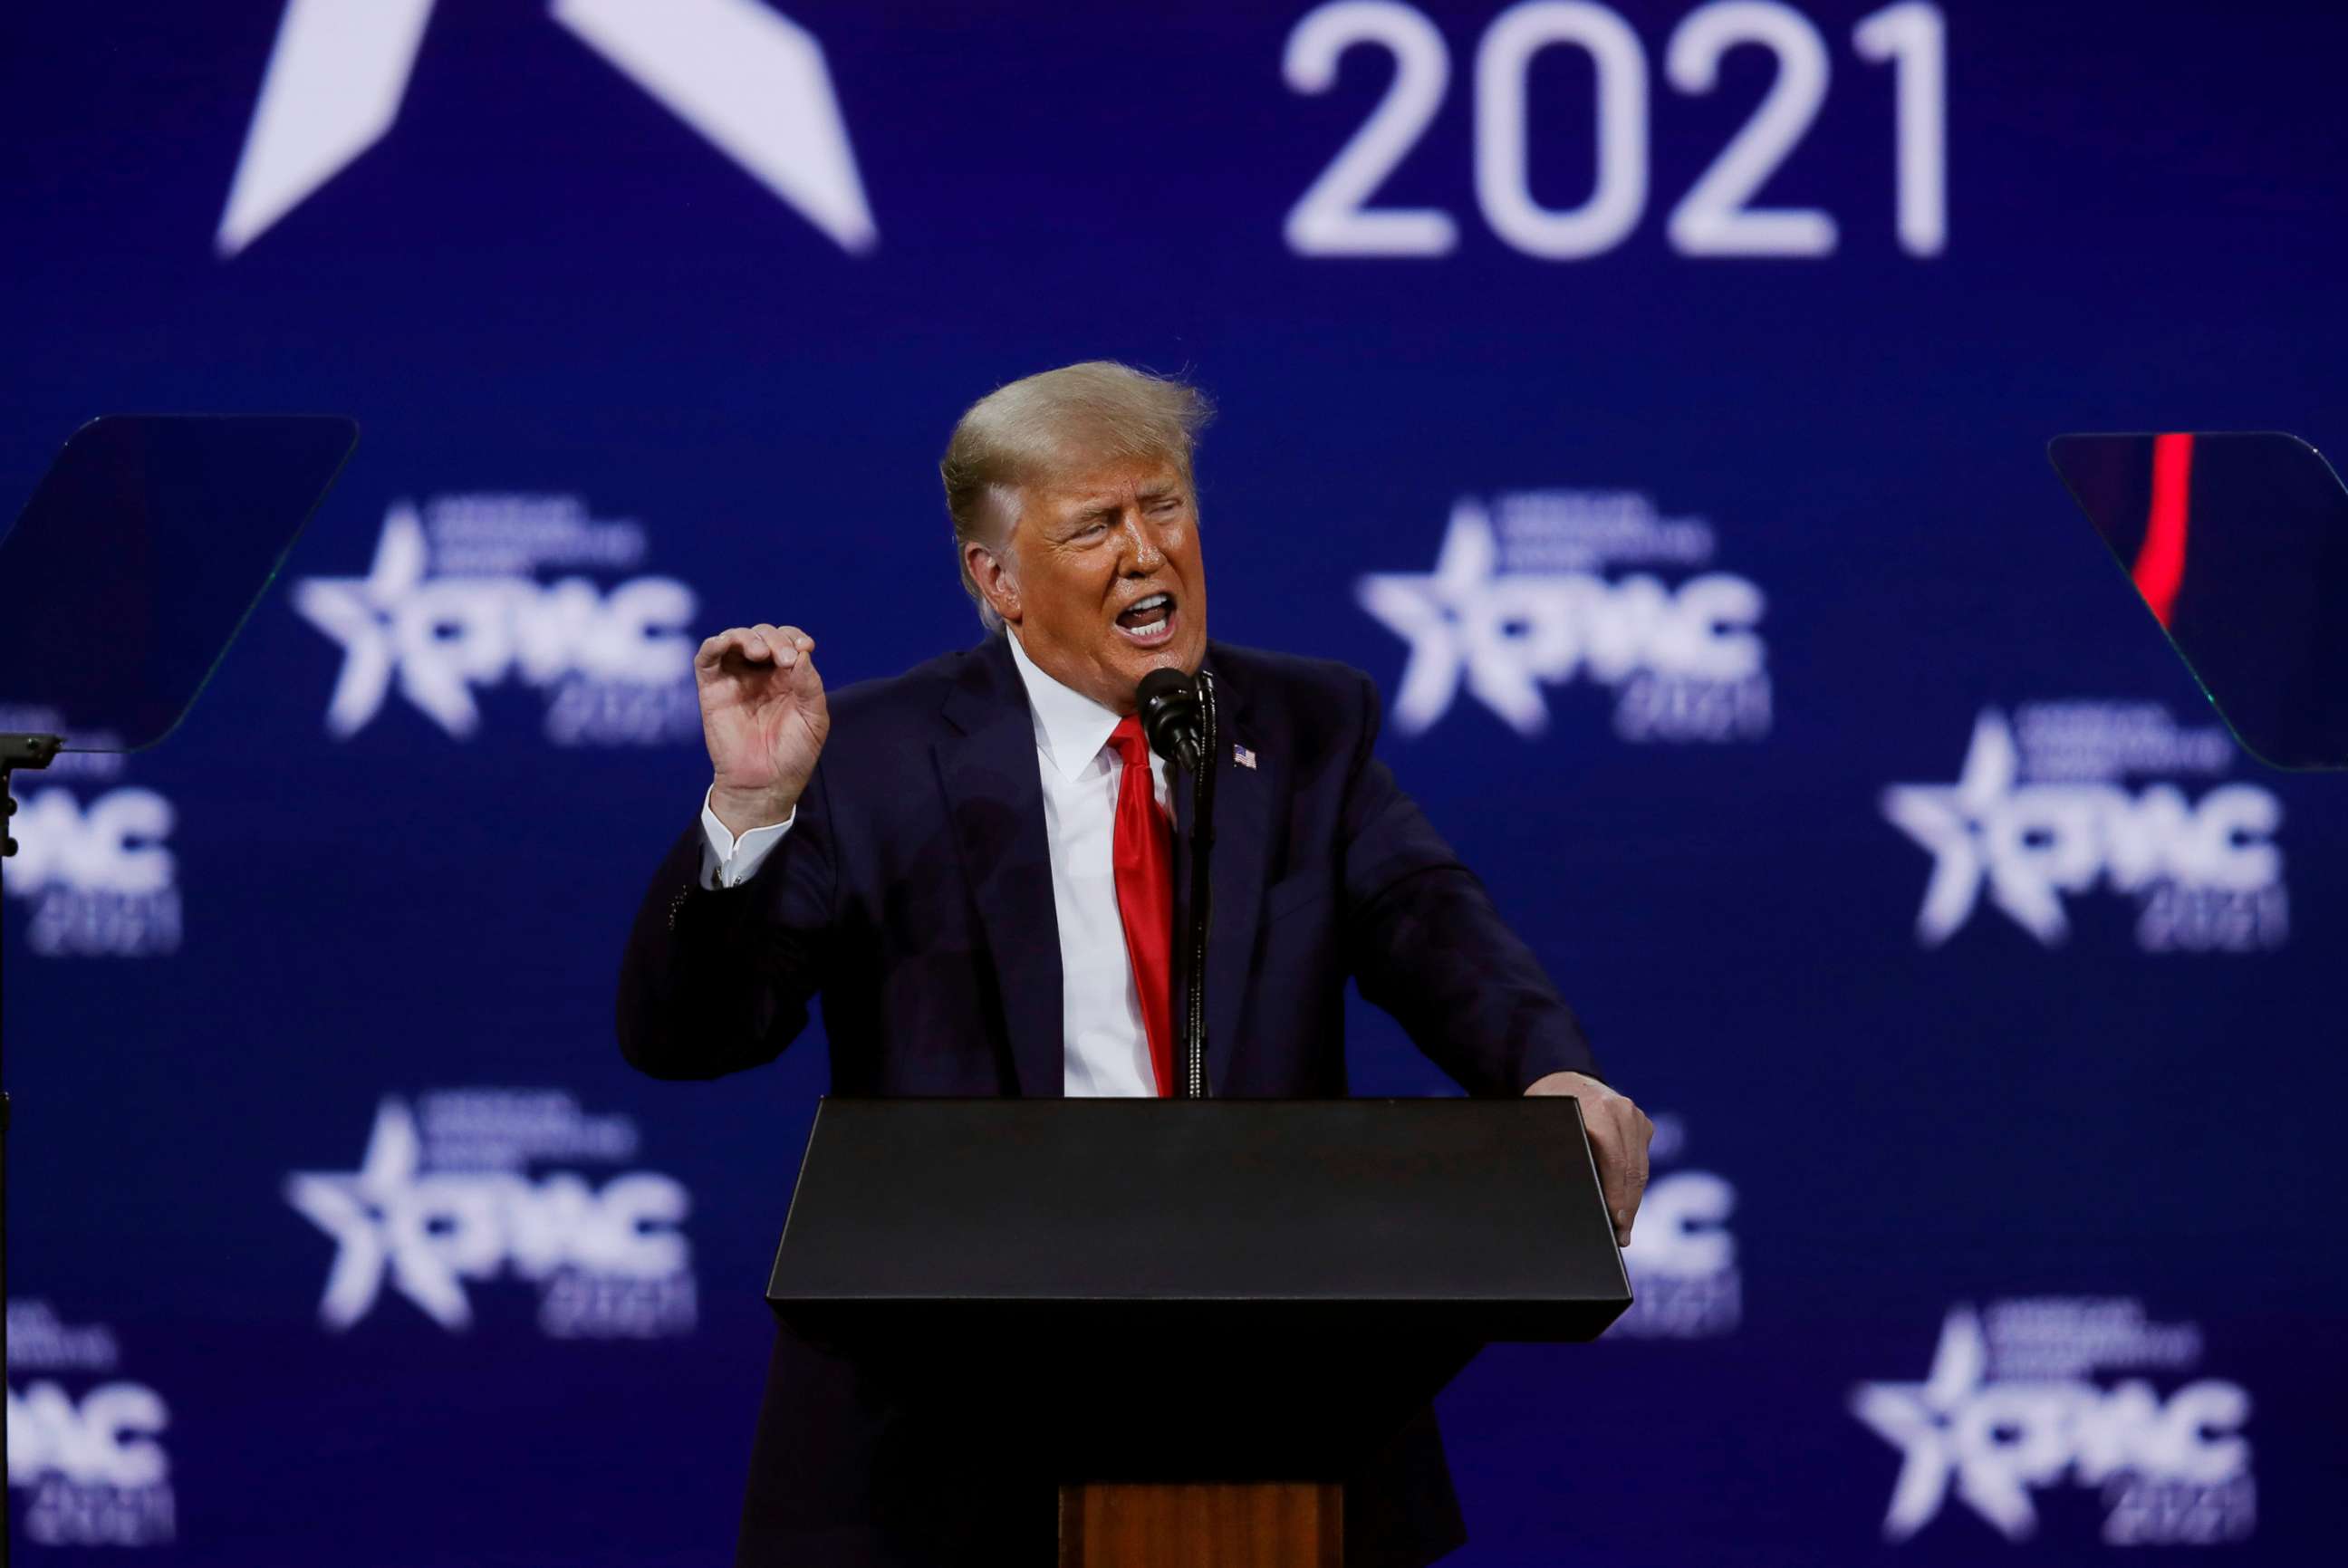 PHOTO: Former President Donald Trump speaks at the Conservative Political Action Conference (CPAC) in Orlando, Fla., Feb. 28, 2021.